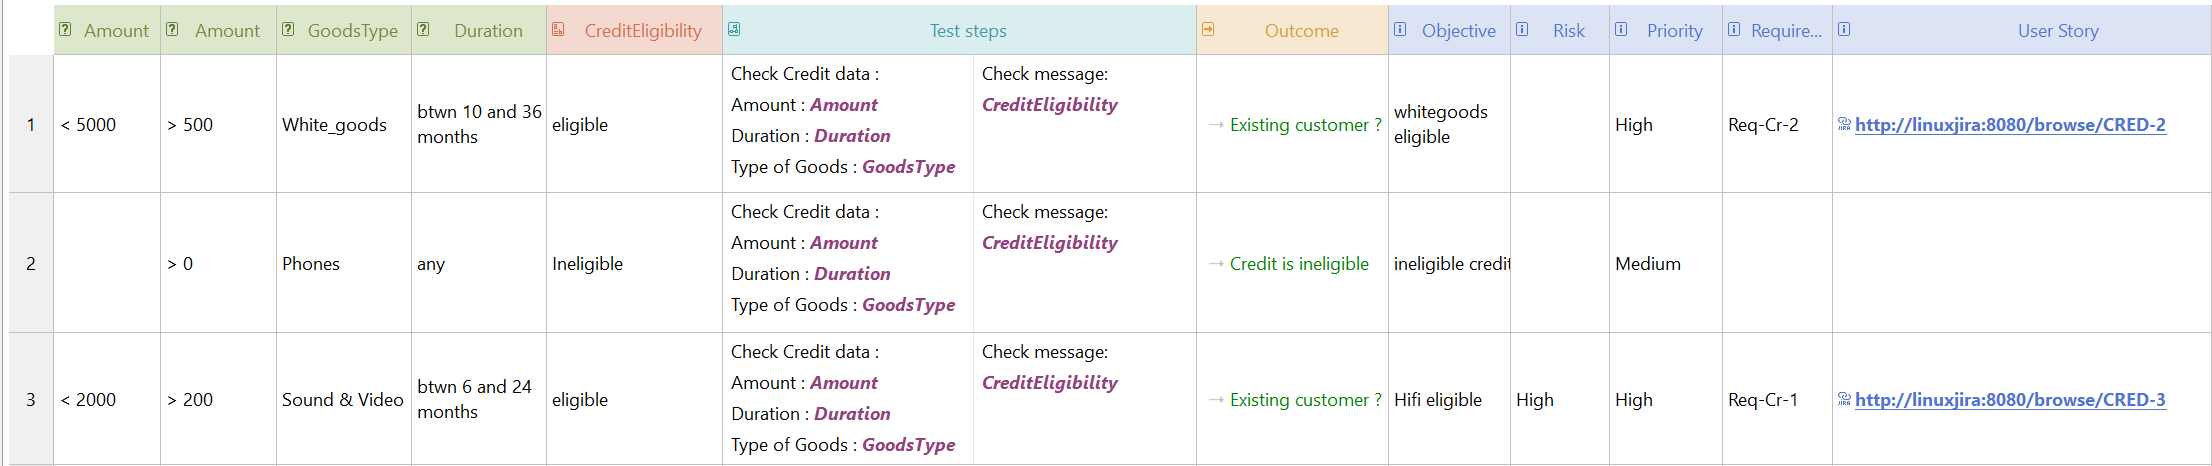 Decision table containing conditions, parameterized test steps and lins to Jira issues